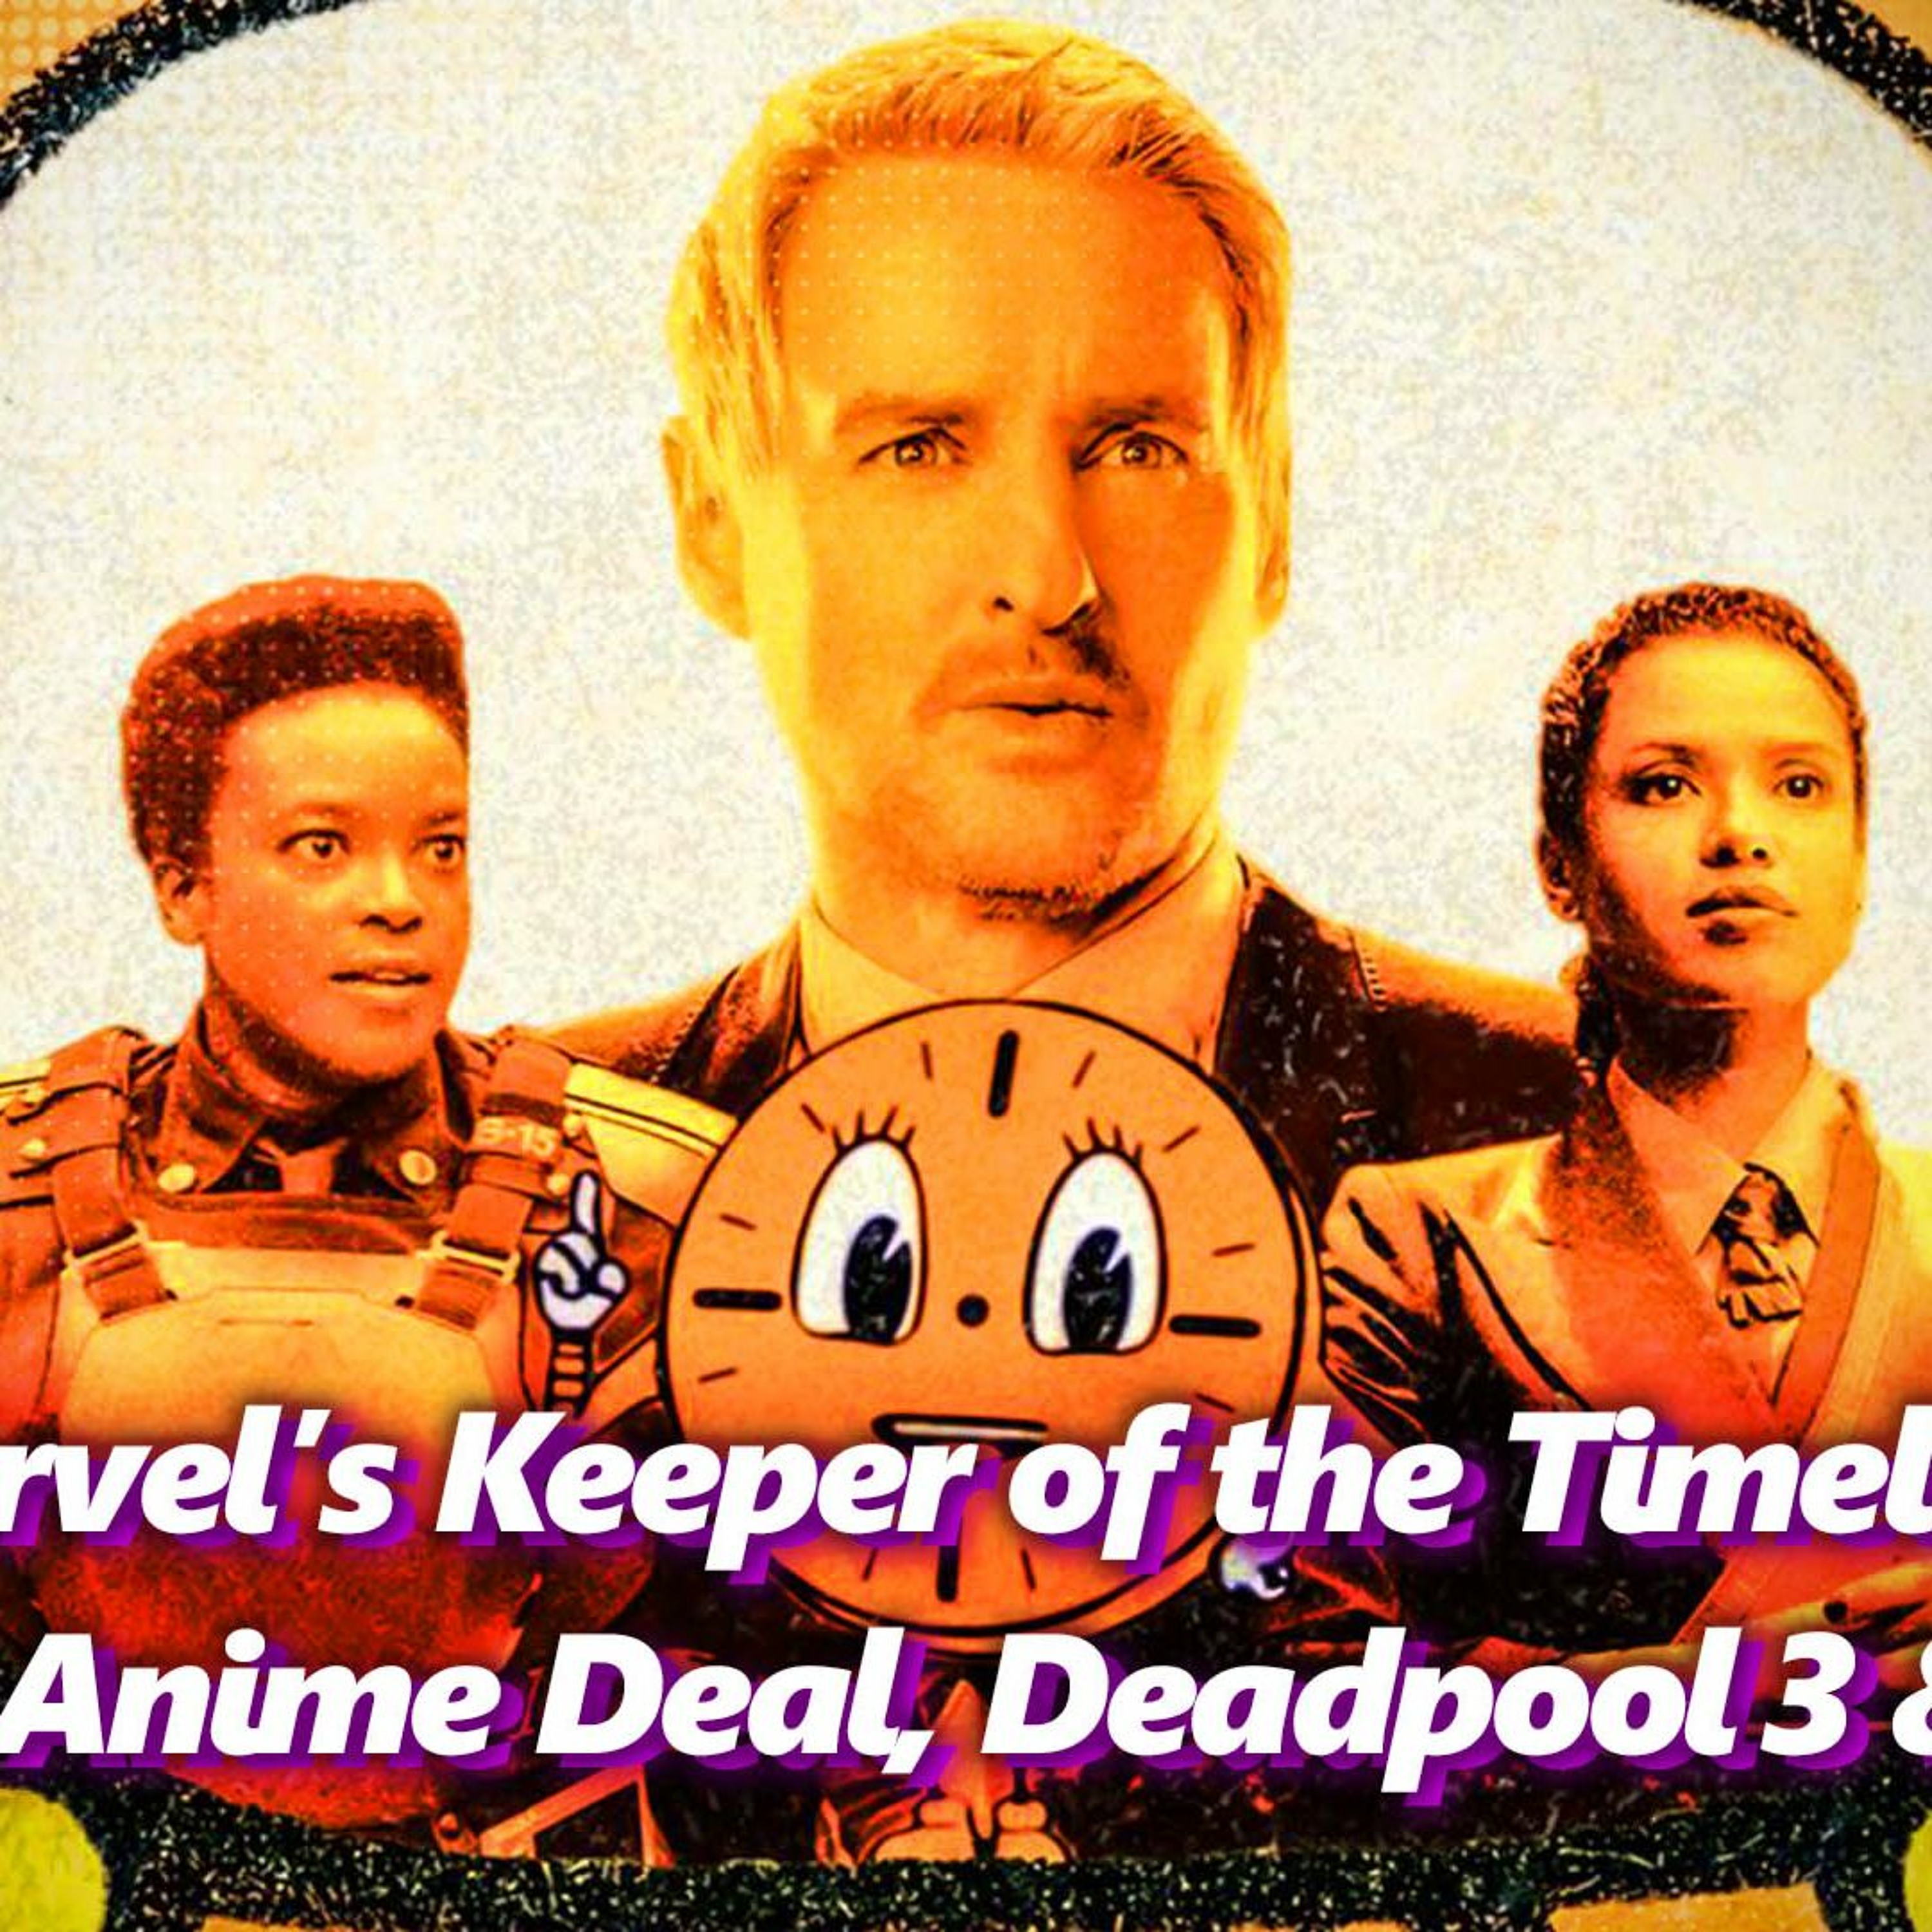 Marvel's Keeper of the Timeline, Netflix Anime Deal, Deadpool 3, & More! | Absolutely Marvel & DC